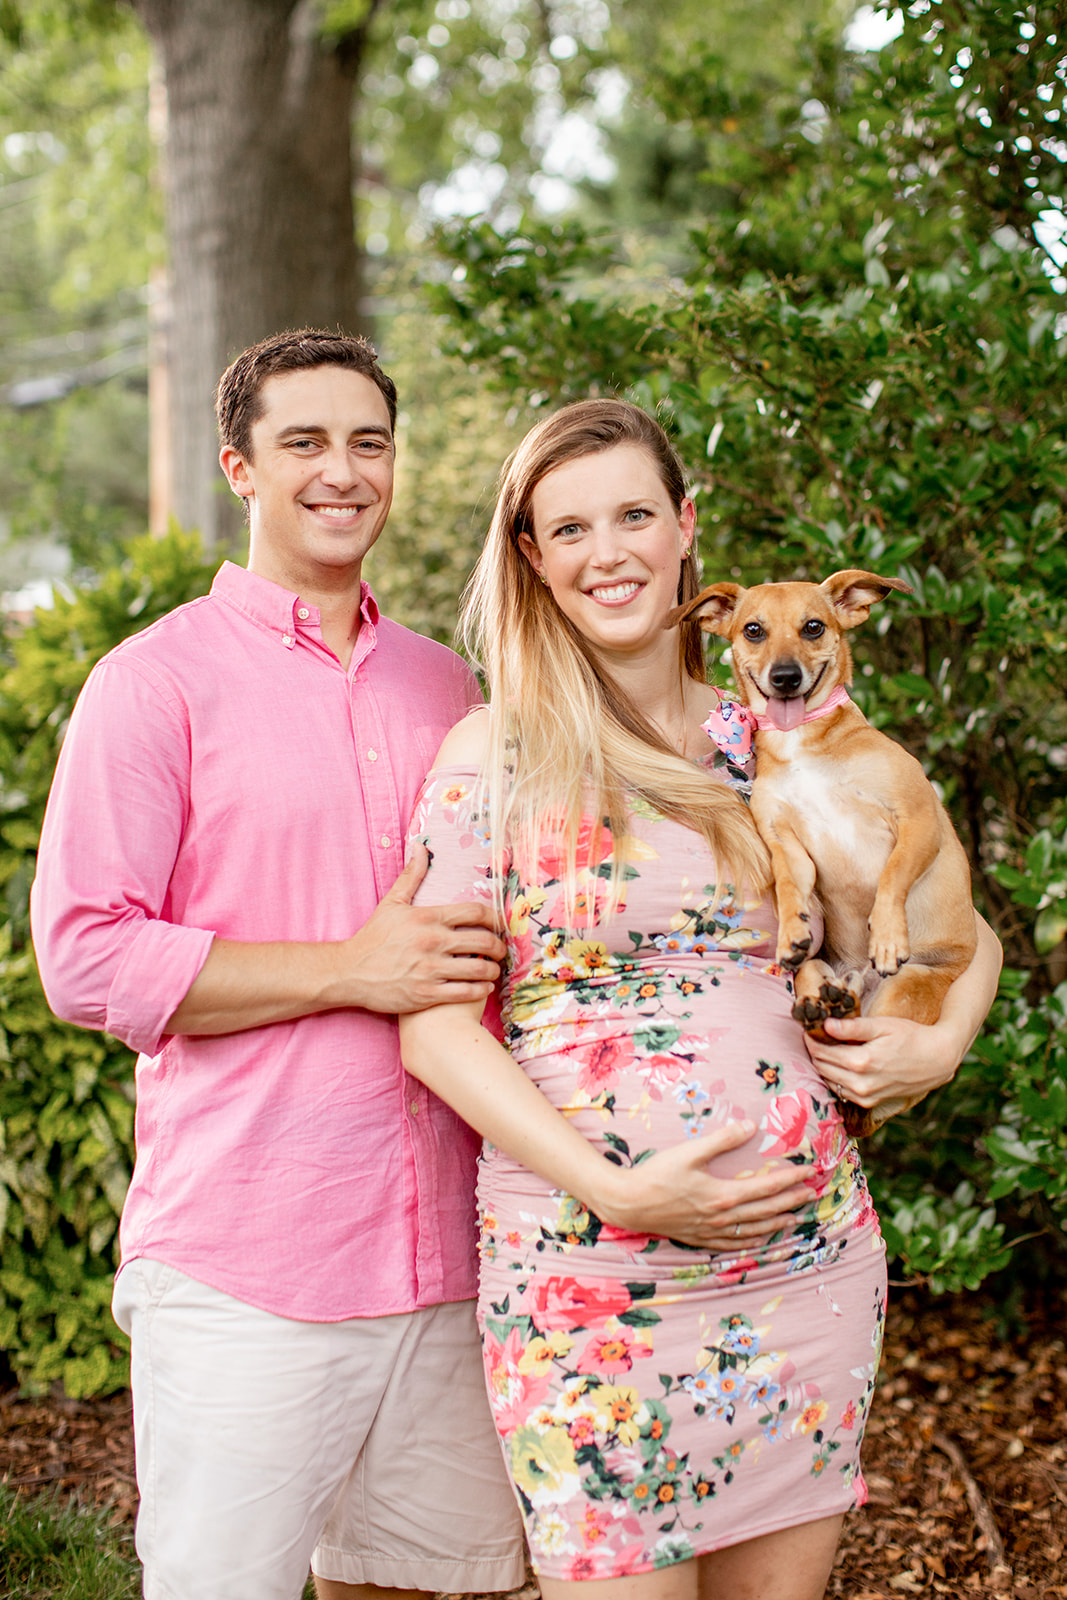 At Home Maternity Photos With a Dog Richmond Va - Image Property of www.j-dphoto.com